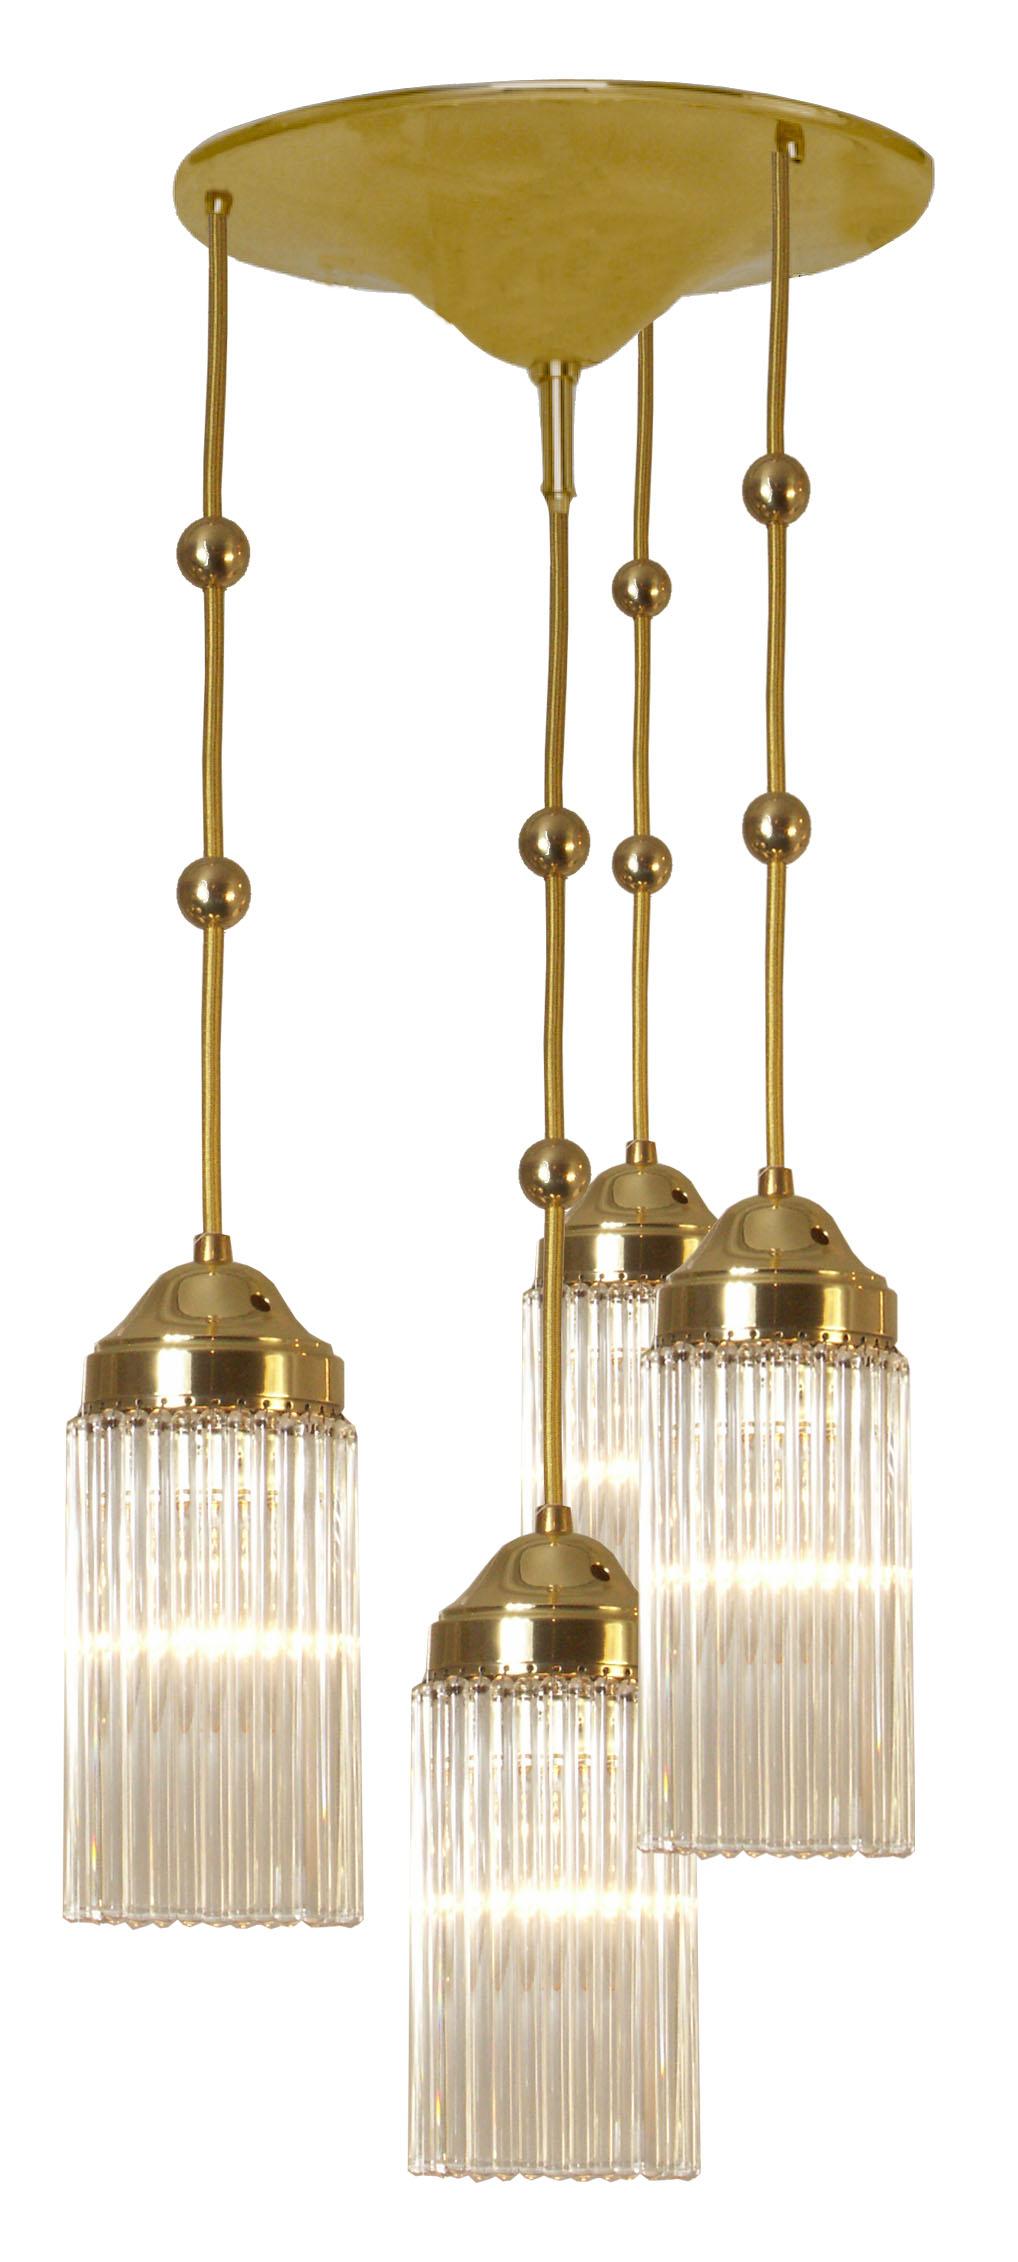 Contemporary production Petite Viennese chandelier, design from the early period of the early 20th century

All components according to the UL regulations, with an additional charge we will UL-list and label our fixtures.
 